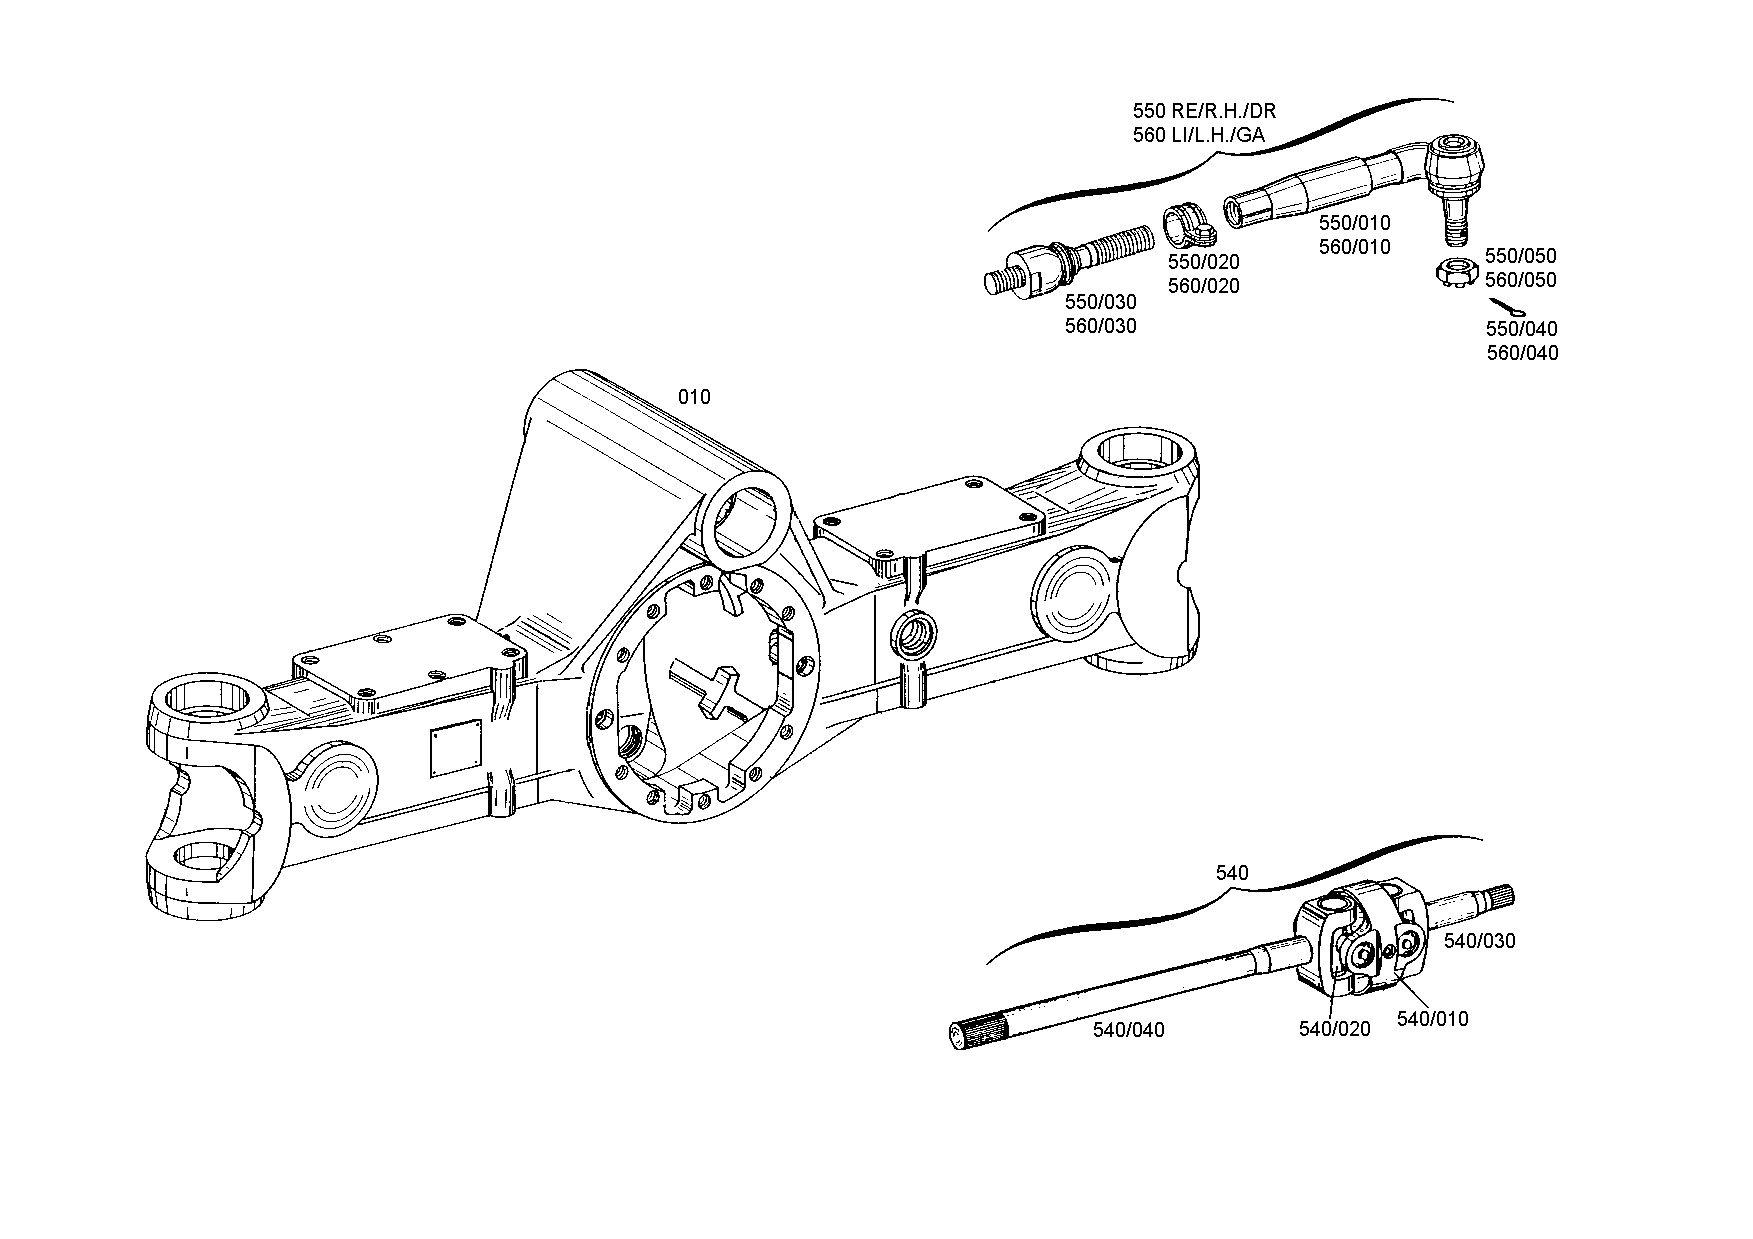 drawing for LIEBHERR GMBH 10100255 - TIE ROD (figure 4)